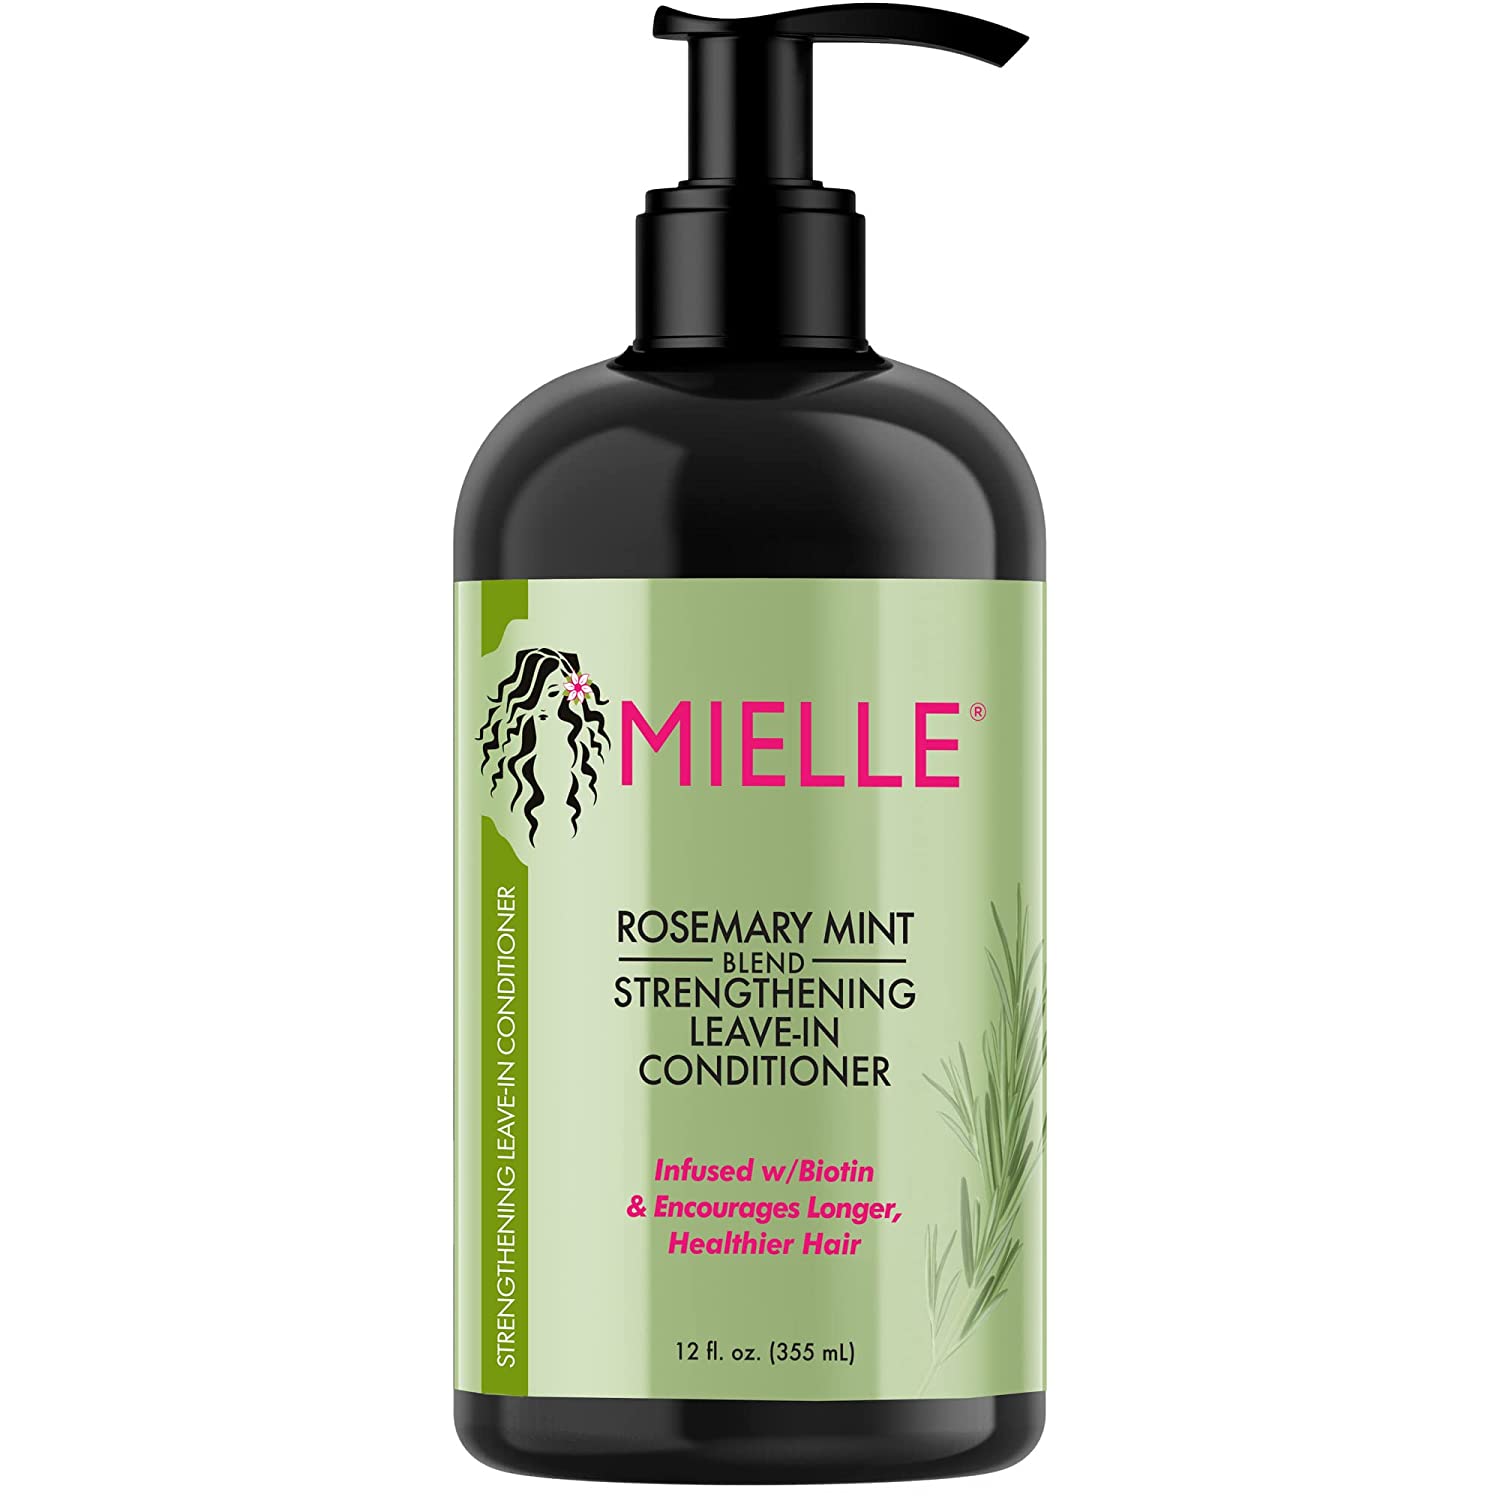 Mielle Organics Rosemary Mint Strengthening Leave-In [...]